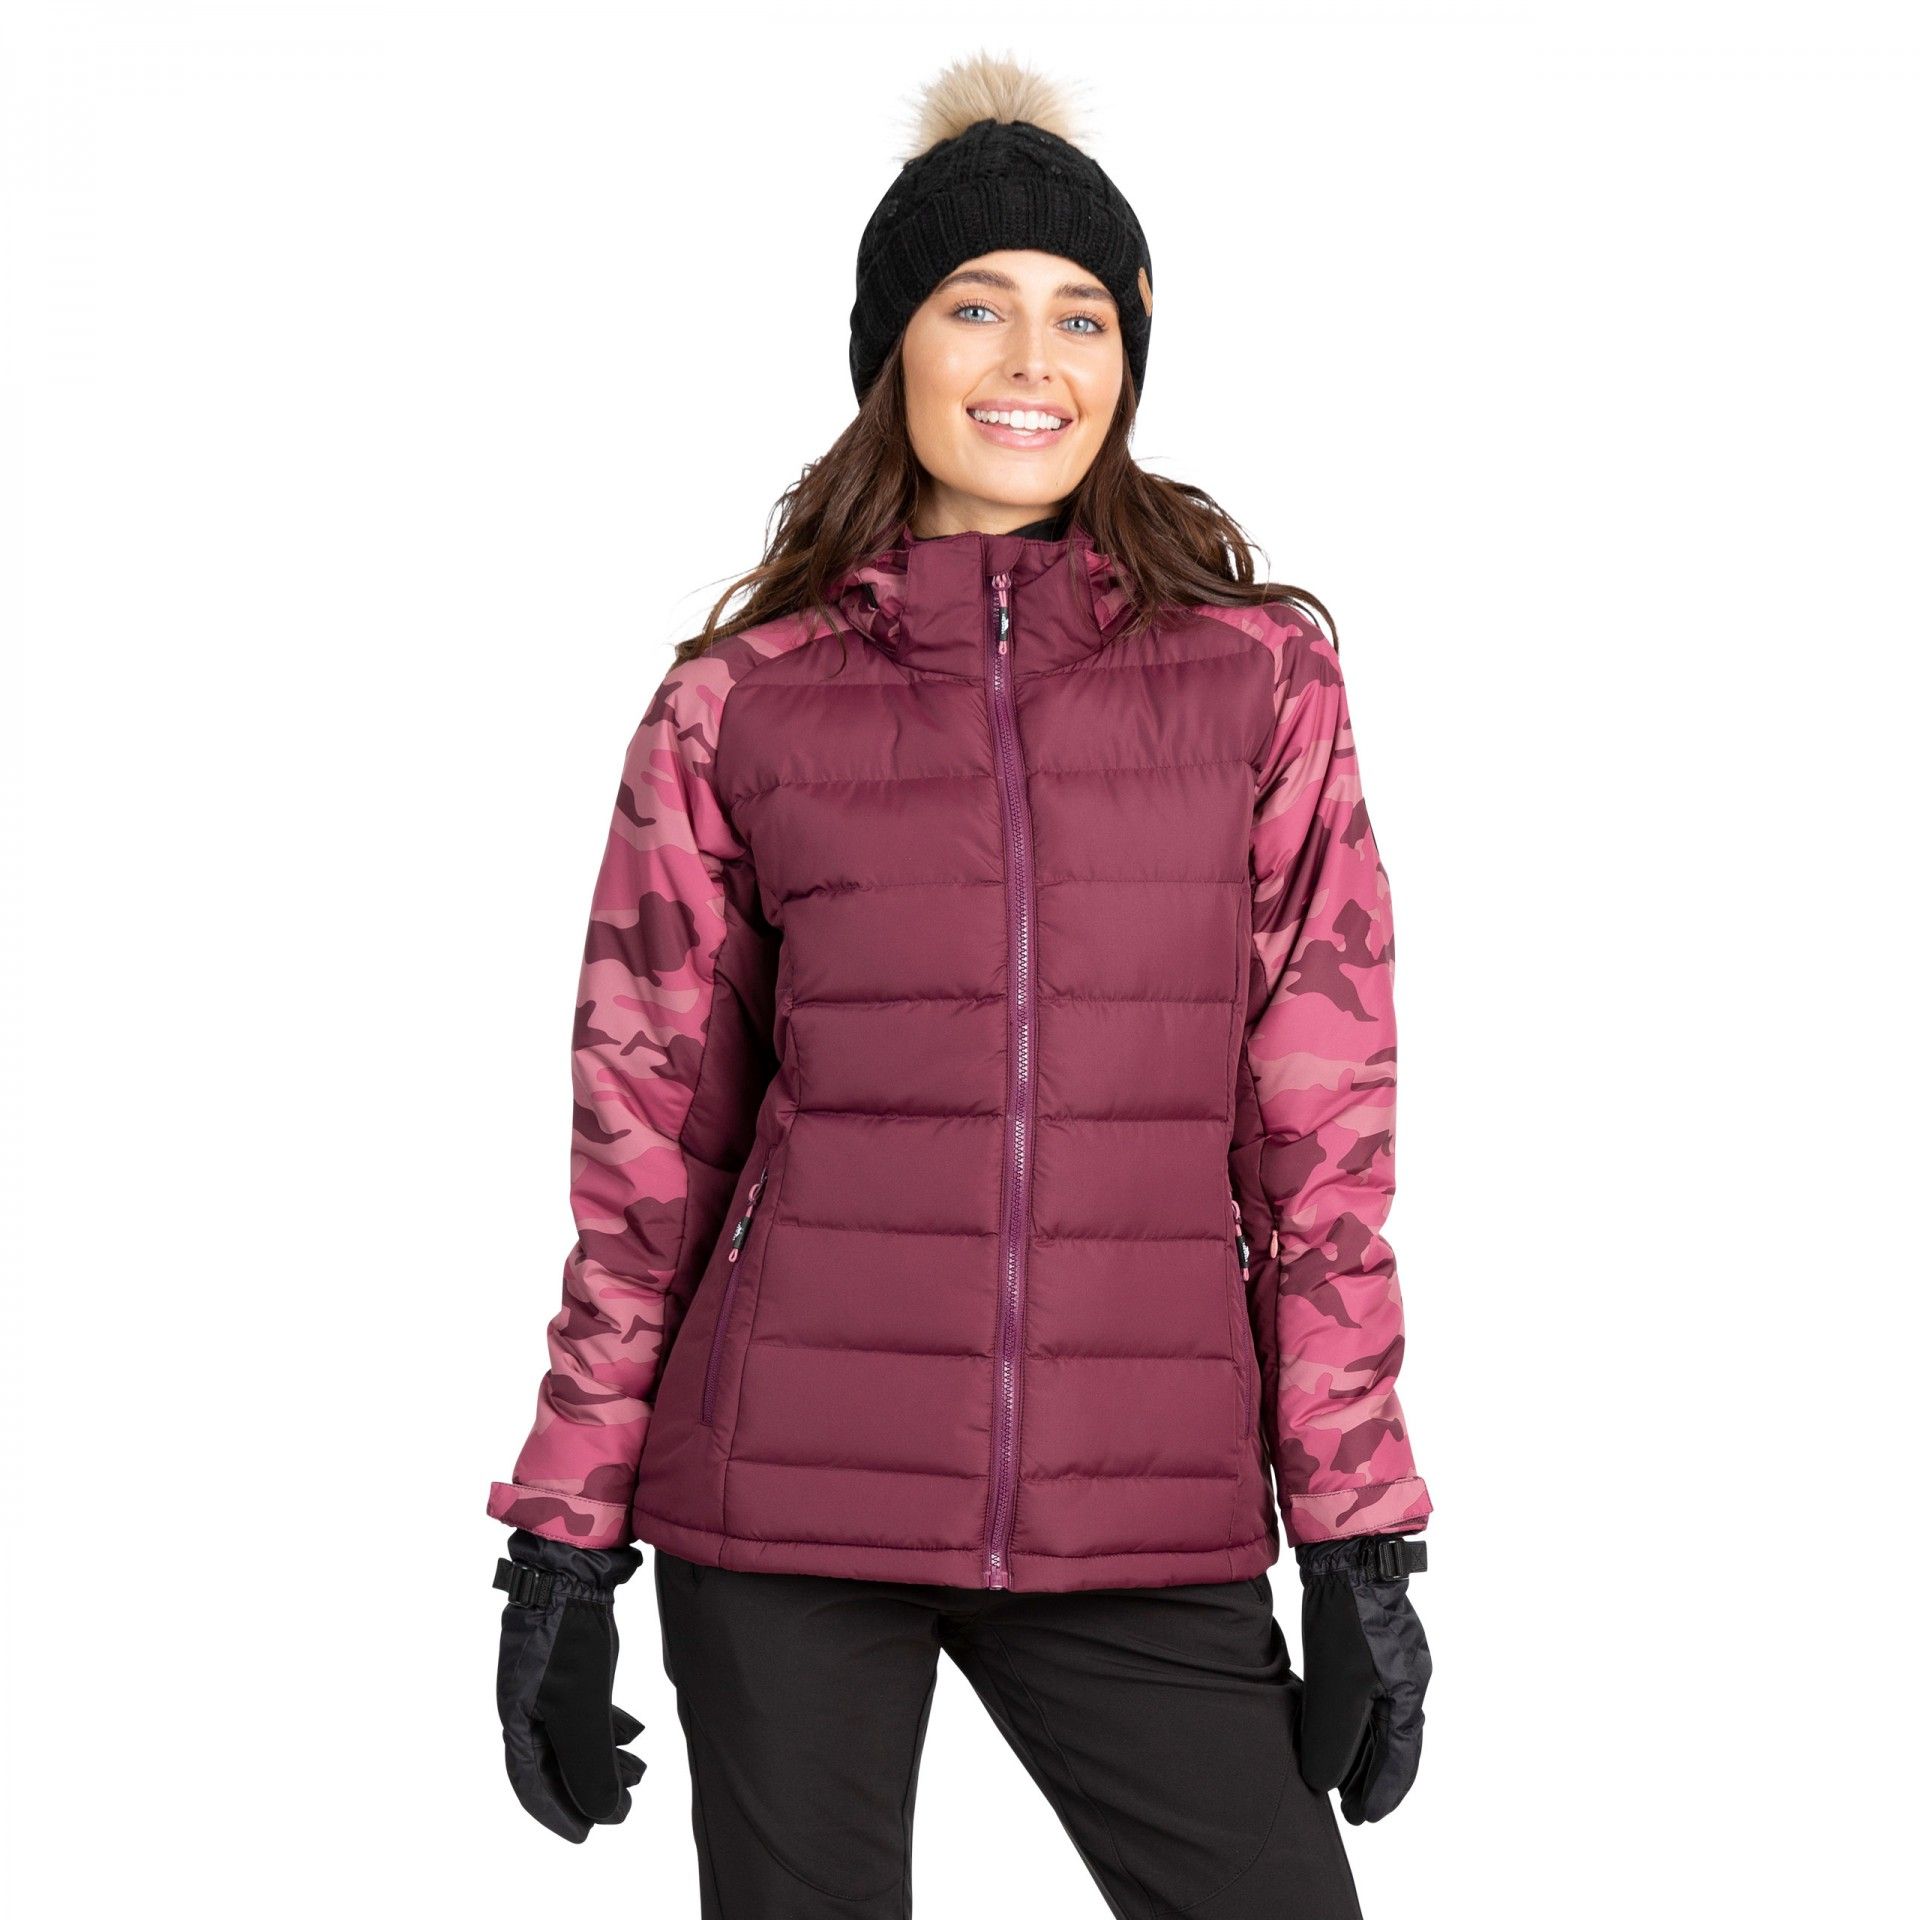 Shell material: 100% polyester pongee AC coated. Lining and filling material: 100% polyester. Urge women`s ski jackets are expertly woven with a lightly padded windproof shell. Features a zip-off hood, a high neck with a full zip front fastening, 1 ski pass zip pockets, 2 side zip pockets and long sleeves. Also features wrist guards at the adjustable touch fastening cuffs, an inner storm flap, a snowskirt and a drawcord at the hem. The padded jacket is decorated with camo print panels to detail.